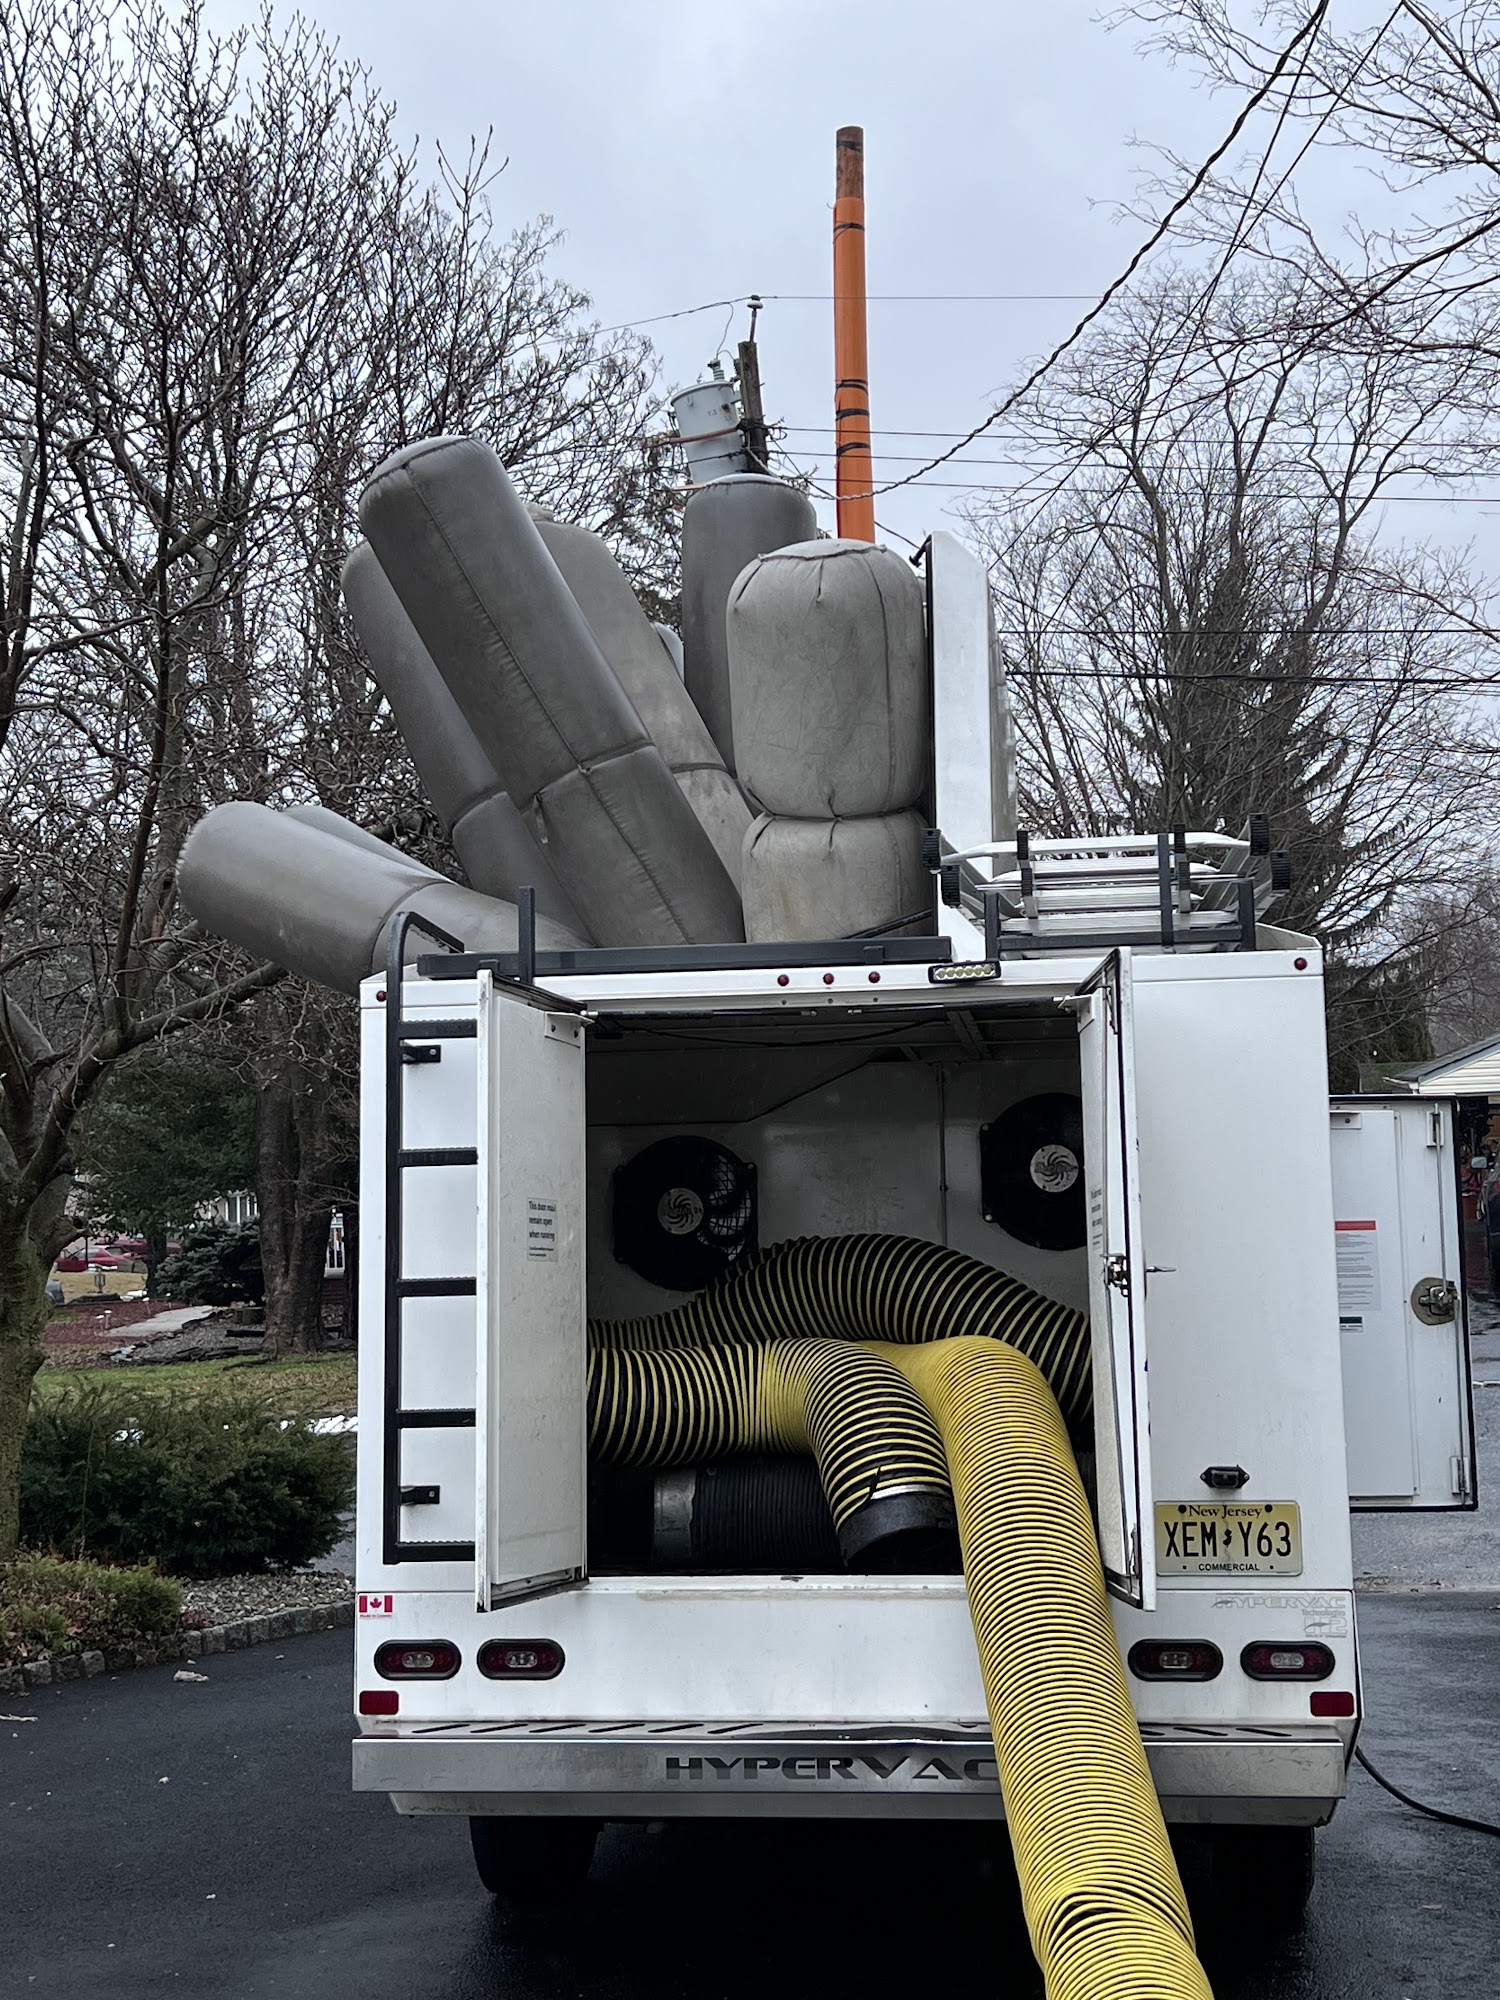 Environmental Duct Cleaning System 11 Orchard Ave E, Holmdel New Jersey 07733